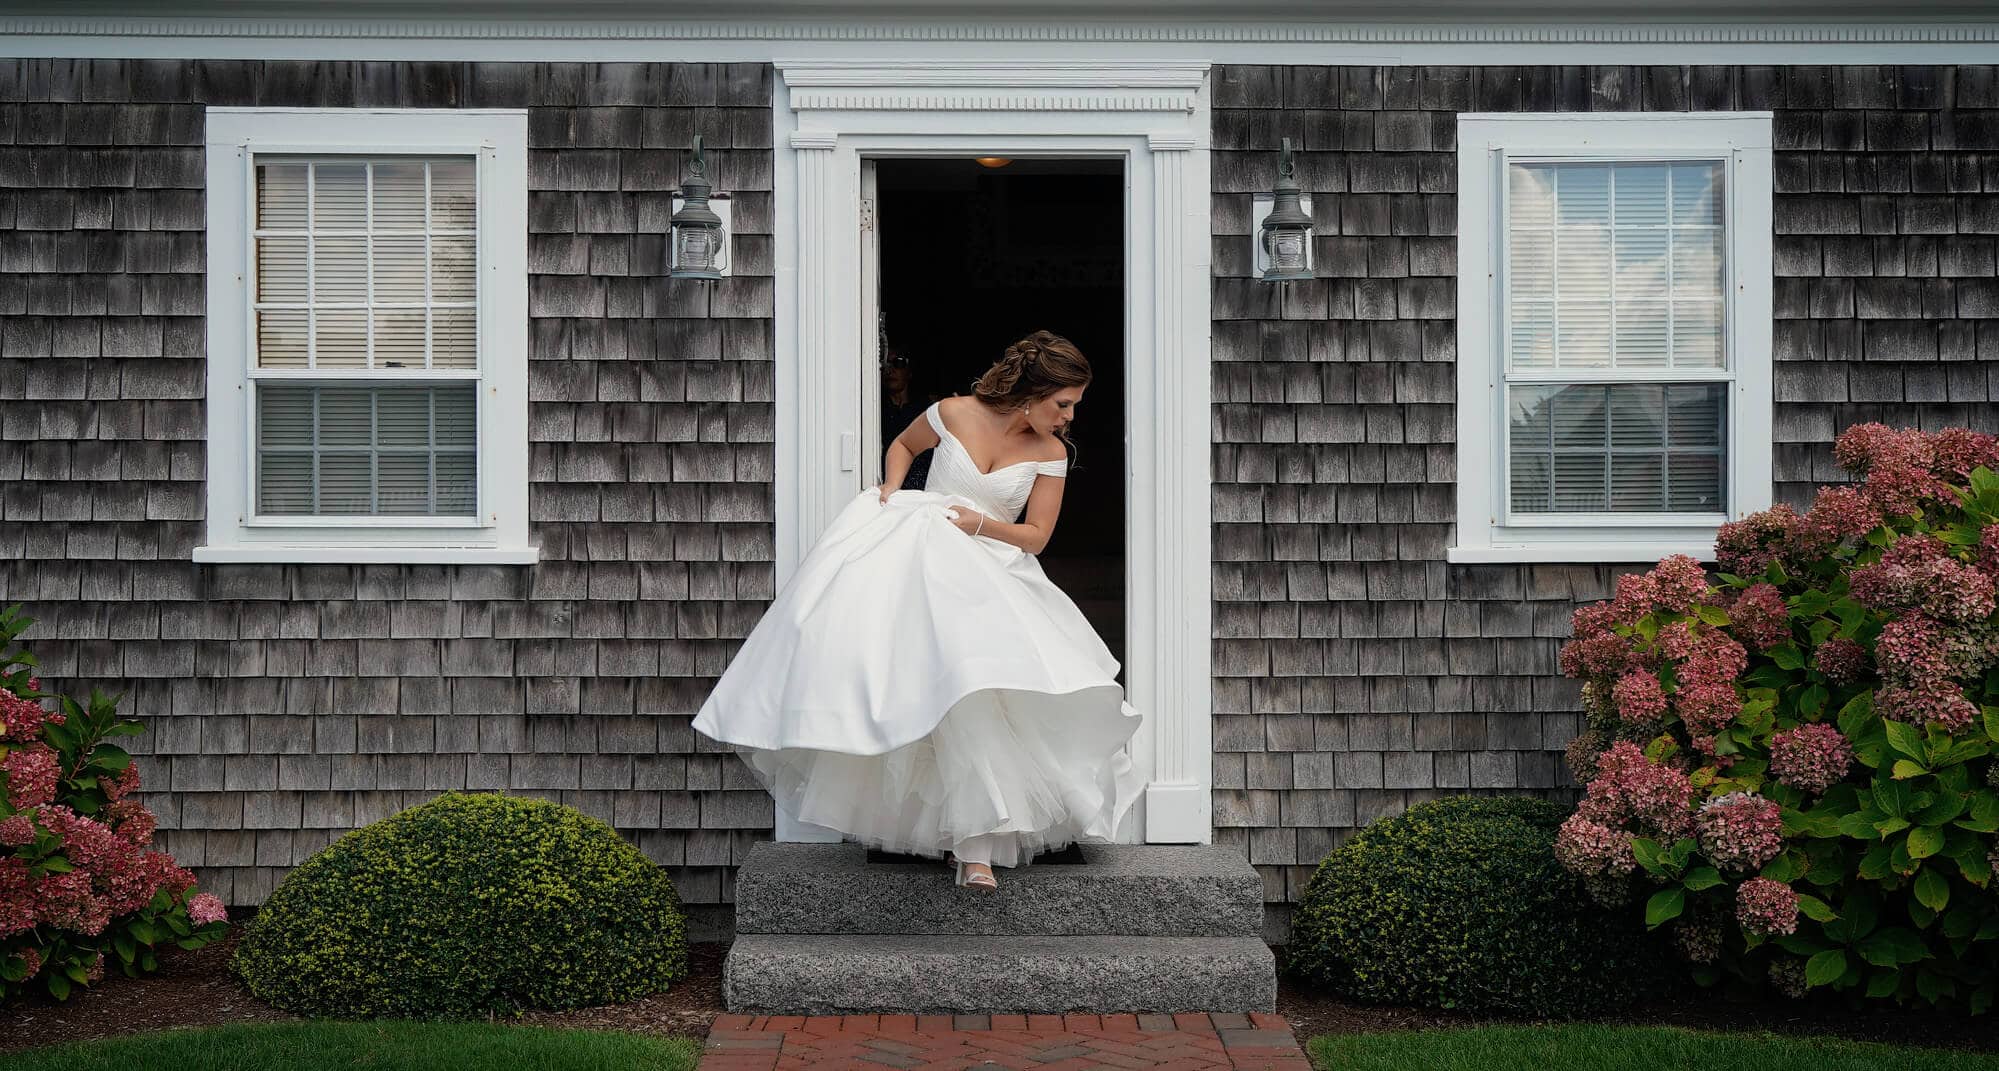 Kate McElwee, Boston wedding photographer, wife to Josh, and mom to two black labs